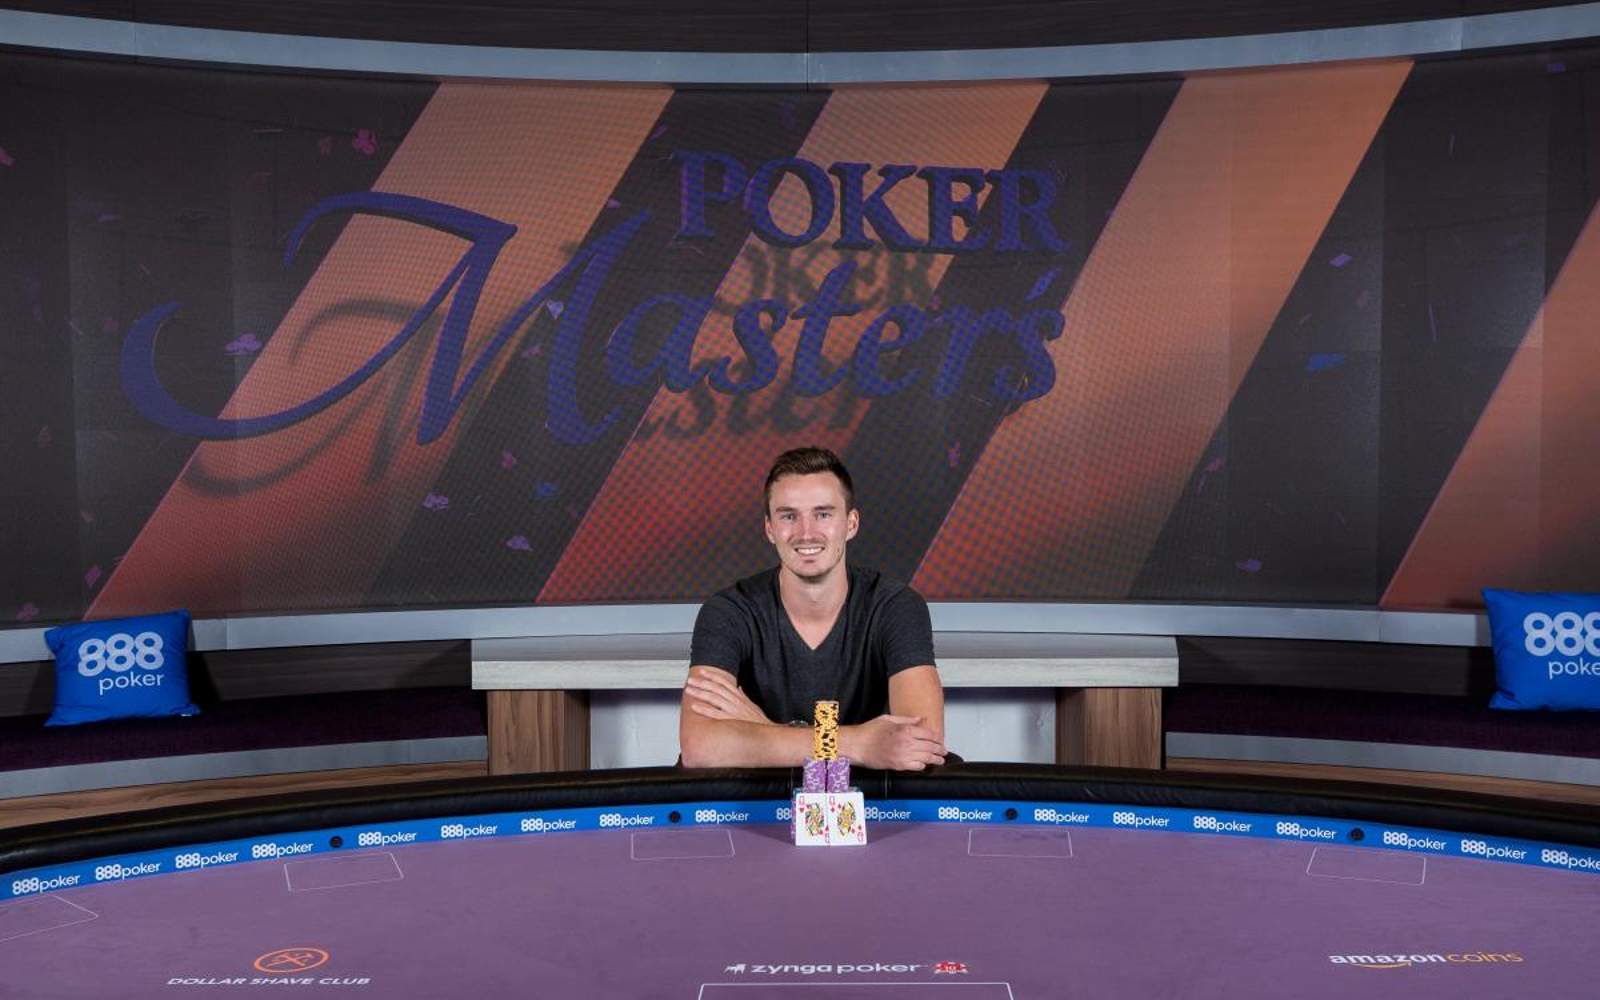 Sontheimer Closes Poker Masters With $100K Championship Win